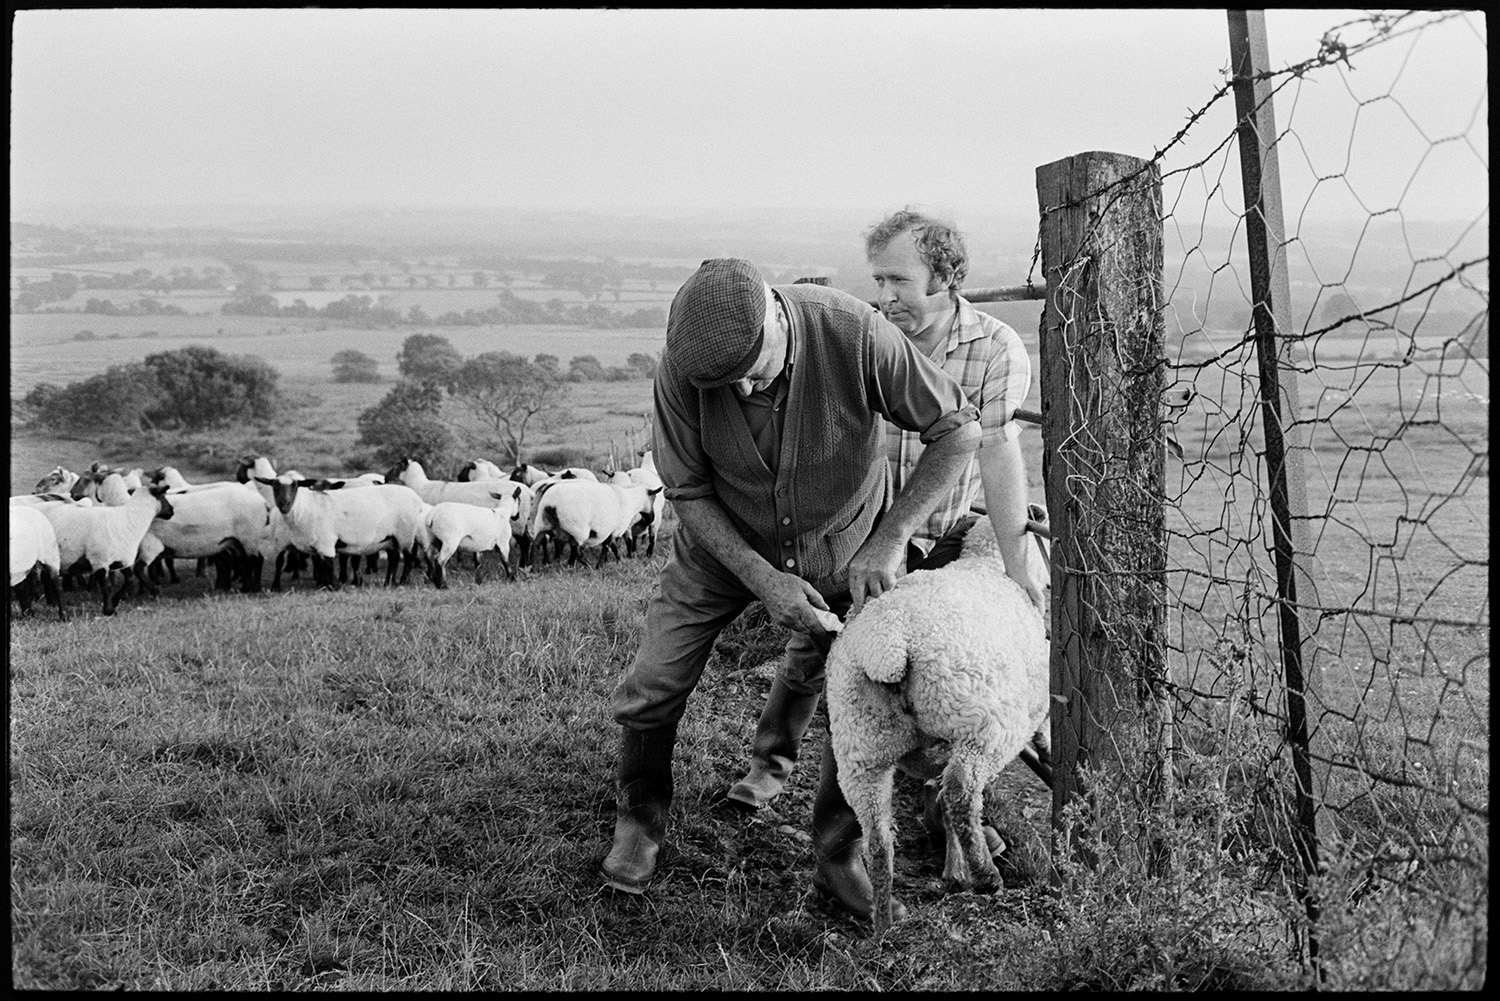 Farmers checking sheep on moor, opening gate to go home, dog. 
[Two men marking a sheep by a wire fence, in a field on Hatherleigh Moor. Other sheep are watching behind them. A landscape of fields and trees is visible in the background.]